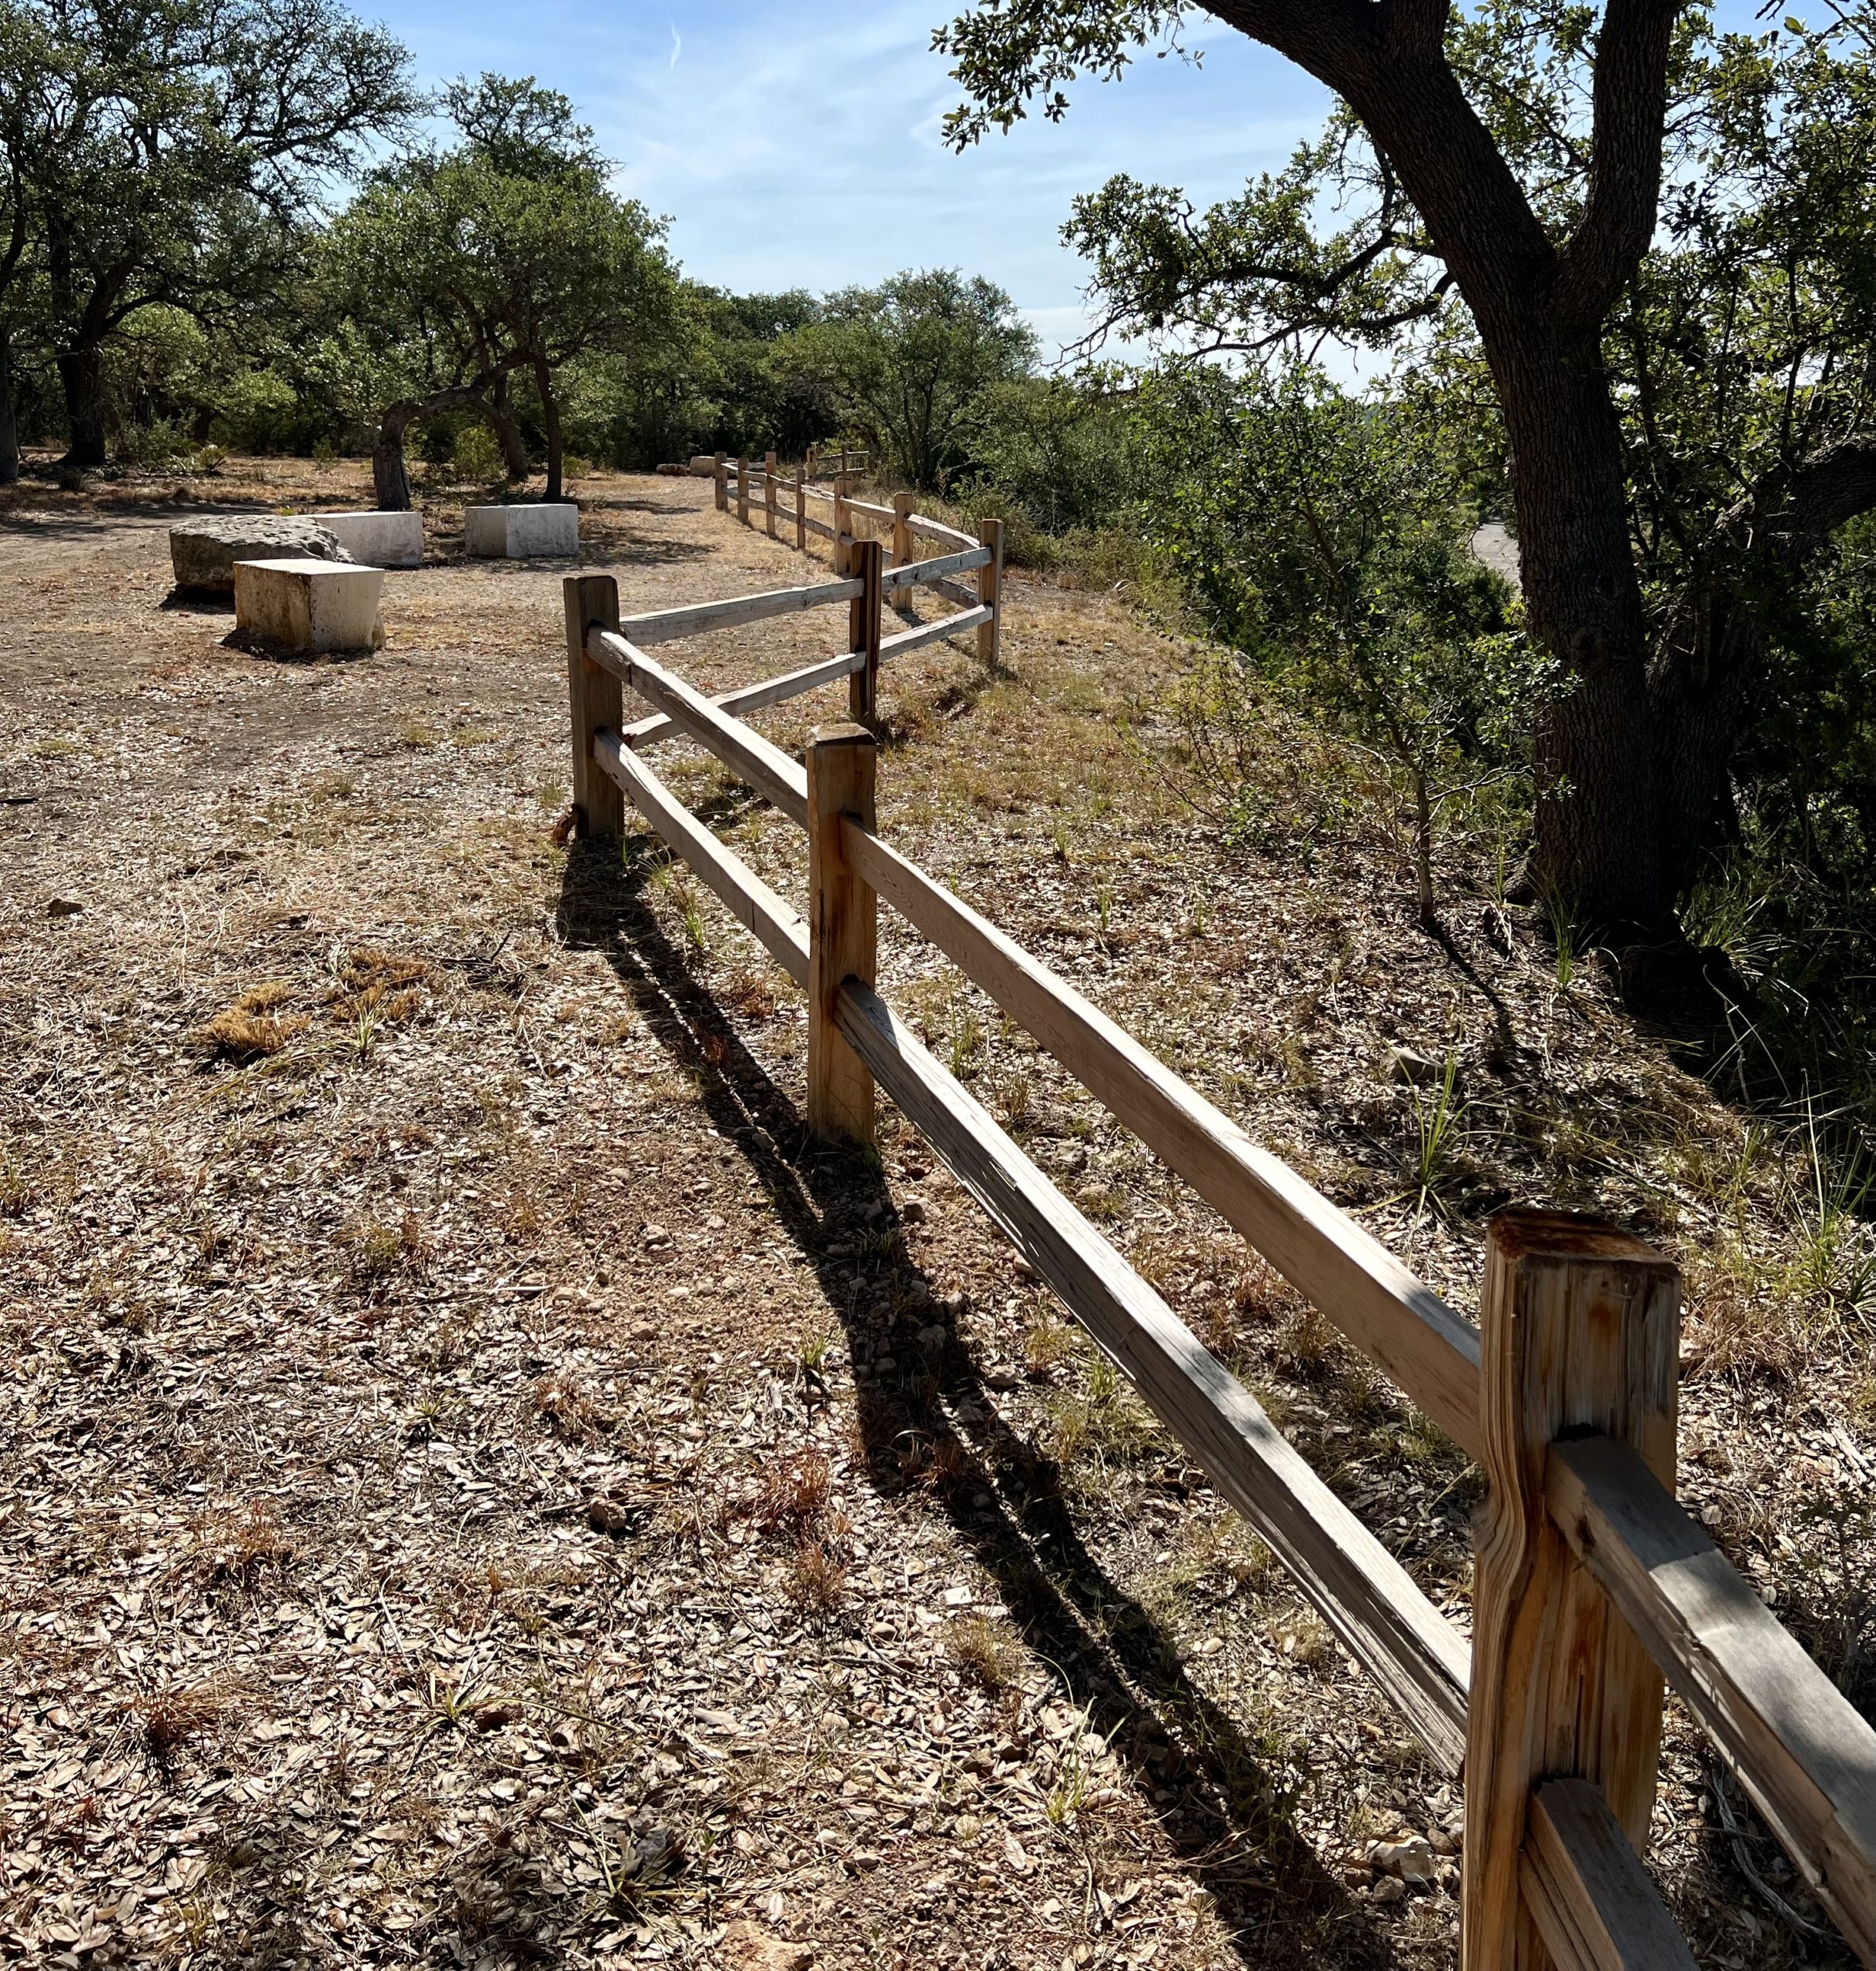 Rustic fence made out of logs place on a slight slope in a Central Texas ranch